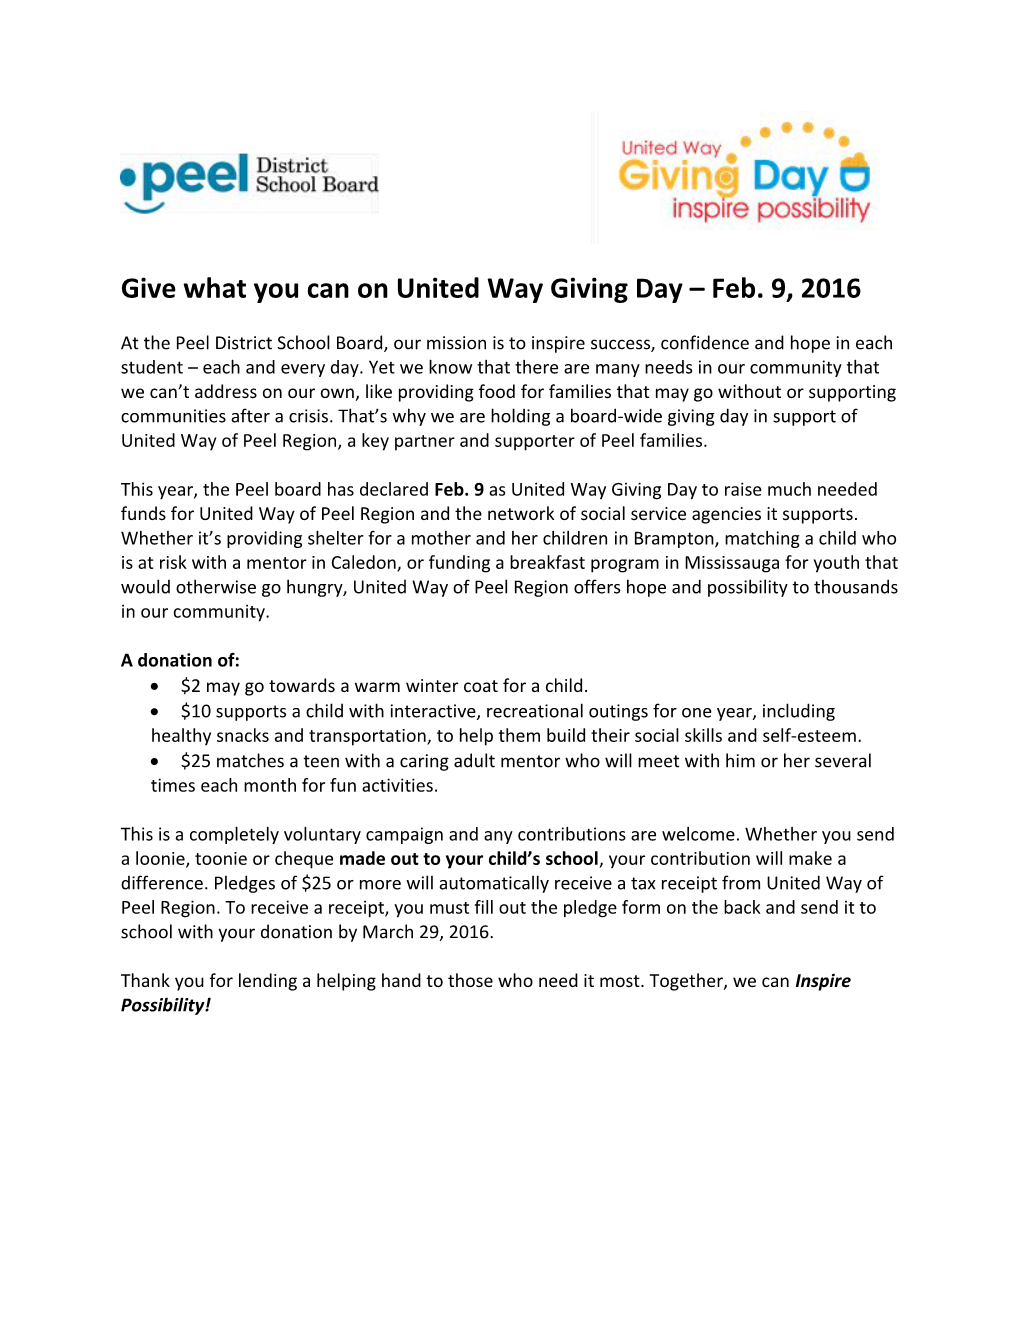 Give What You Can on United Way Giving Day Feb. 9, 2016